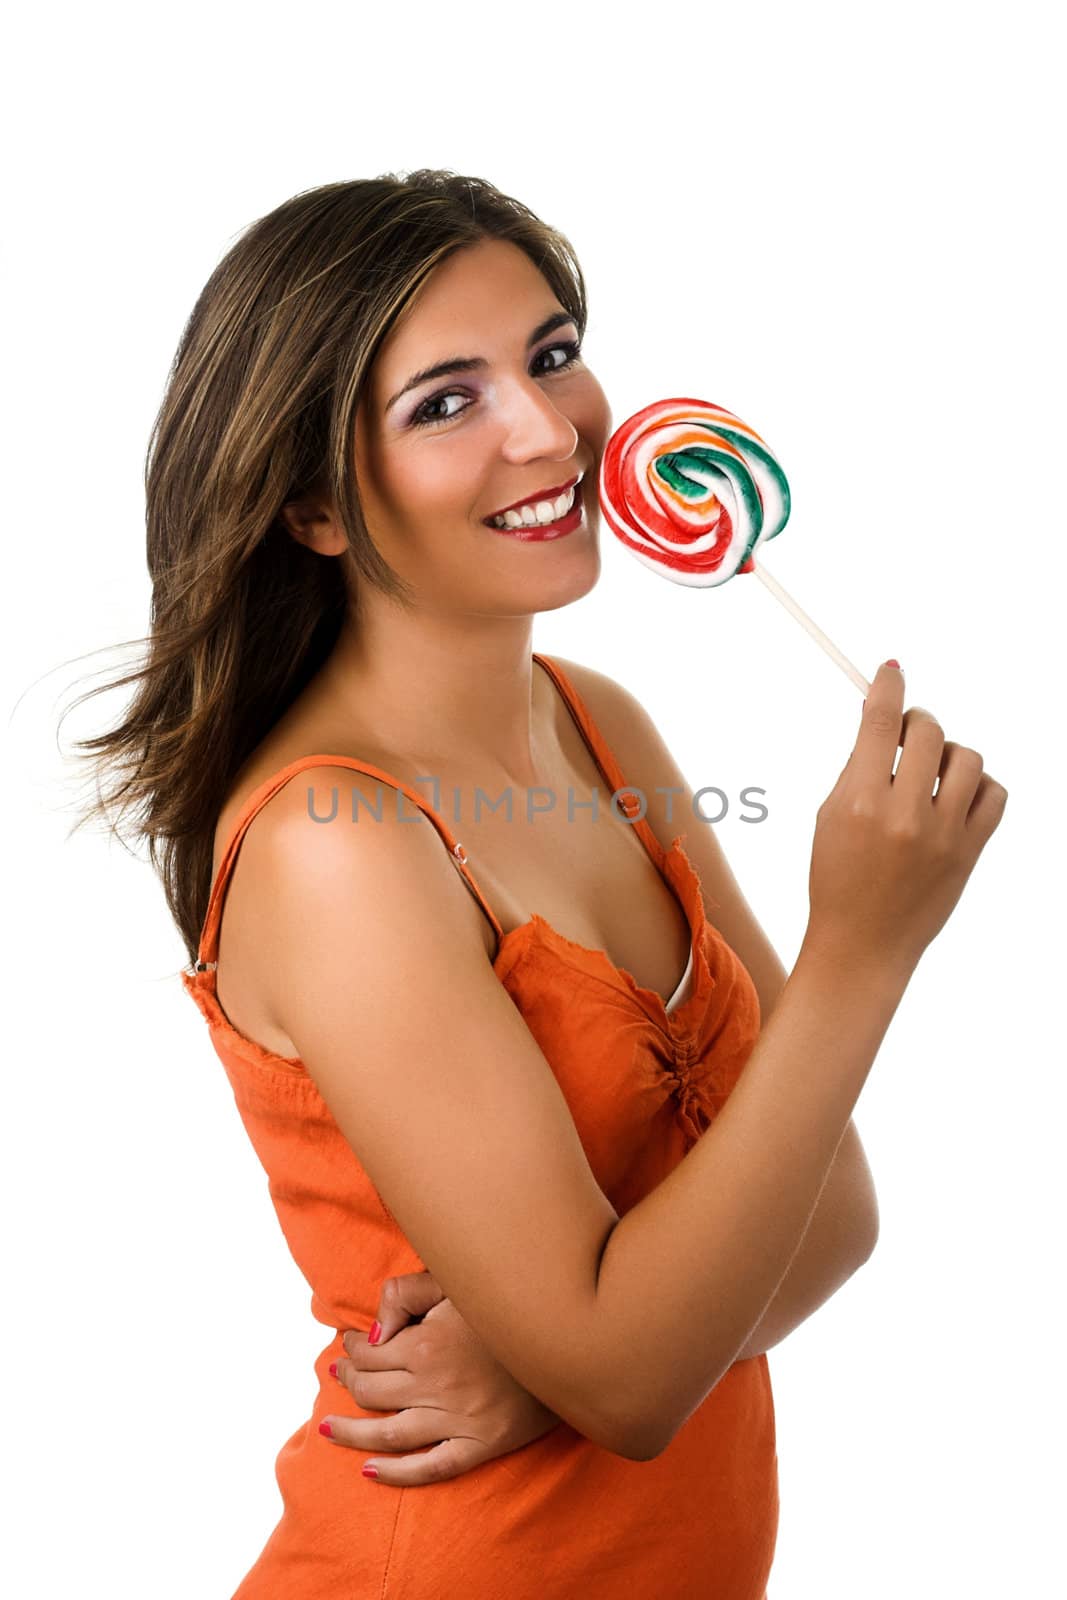 Lollypop Girl - Beautiful woman with a candy in the hands